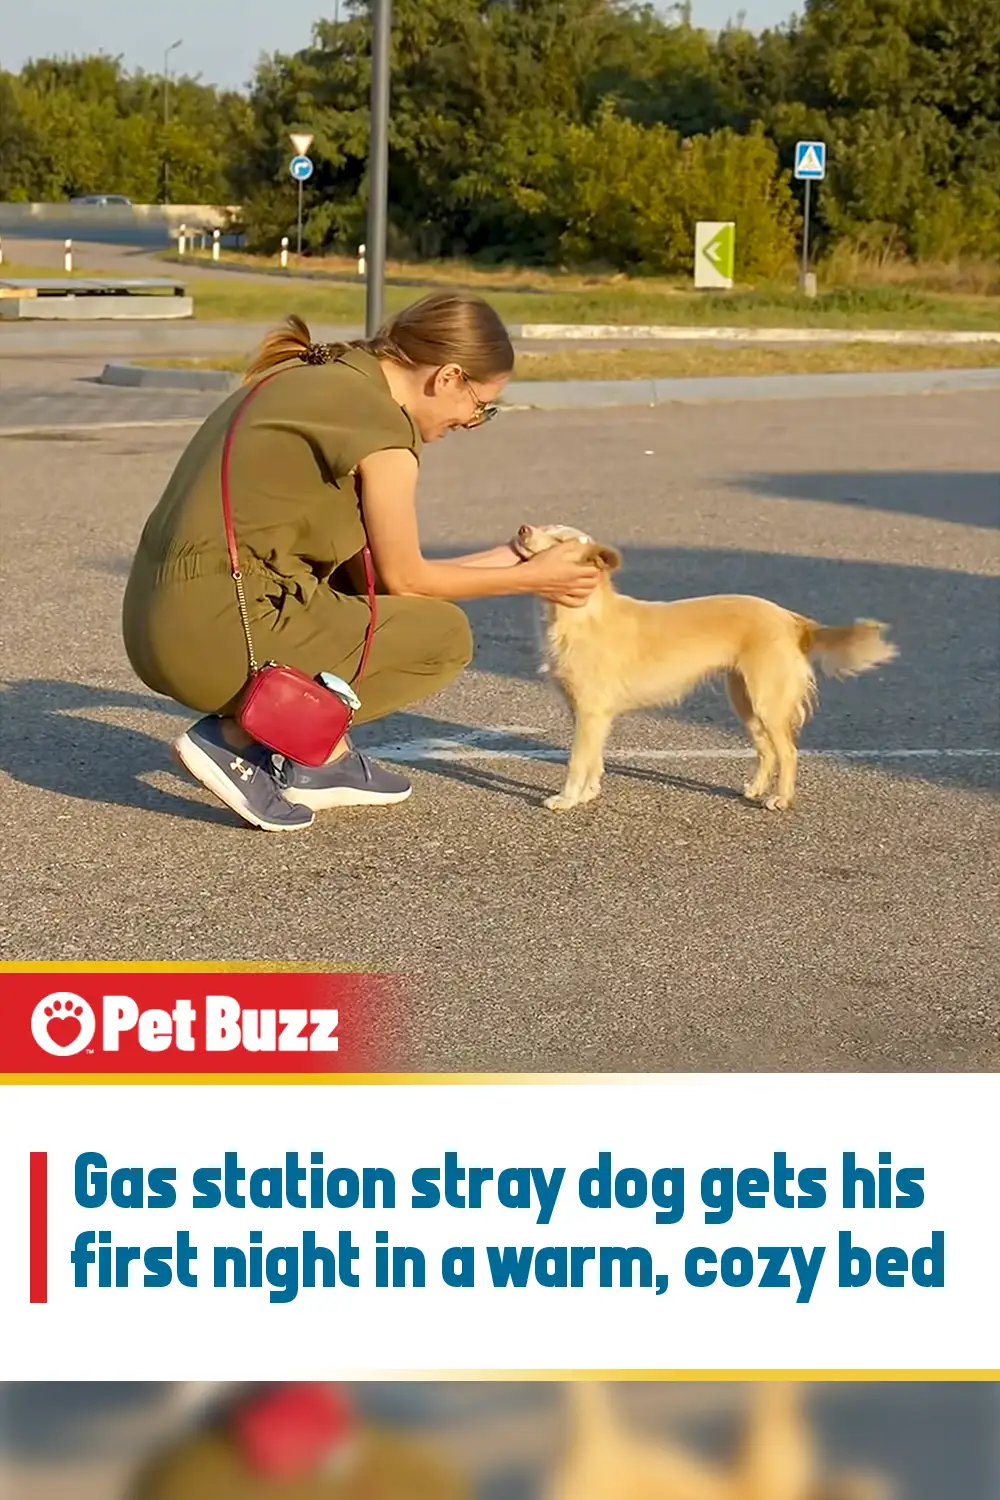 Gas station stray dog gets his first night in a warm, cozy bed